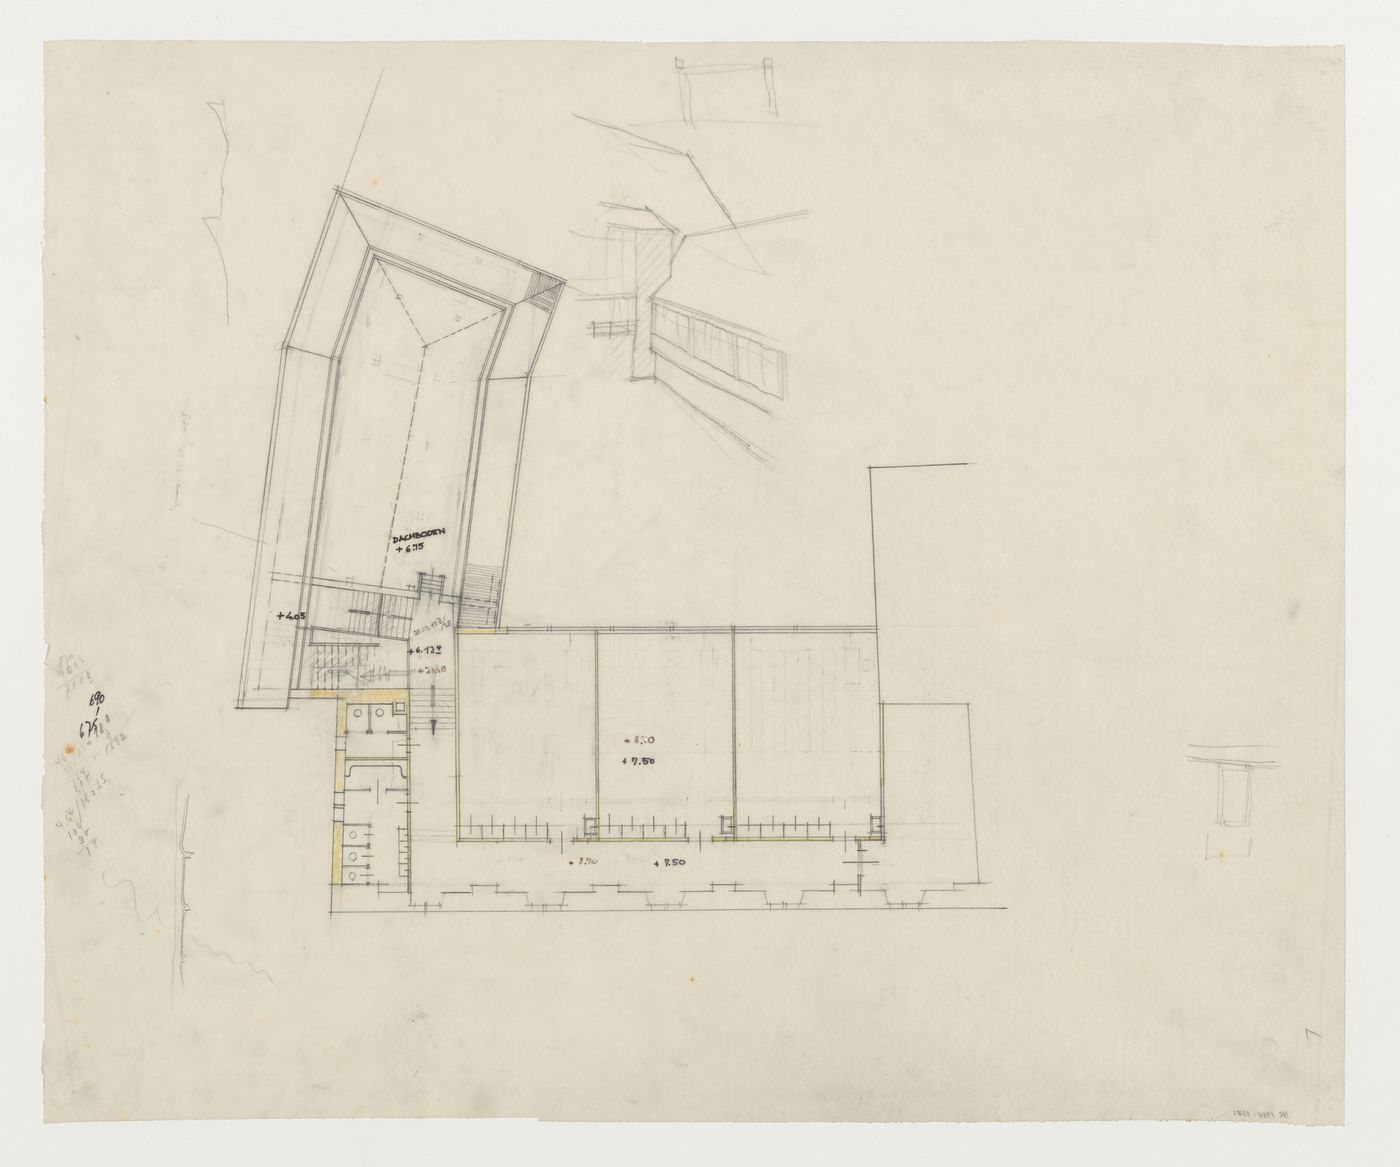 Plan and partial sketch perspective for an addition to an existing building, possibly a school, Limburg an der Lahn, Germany